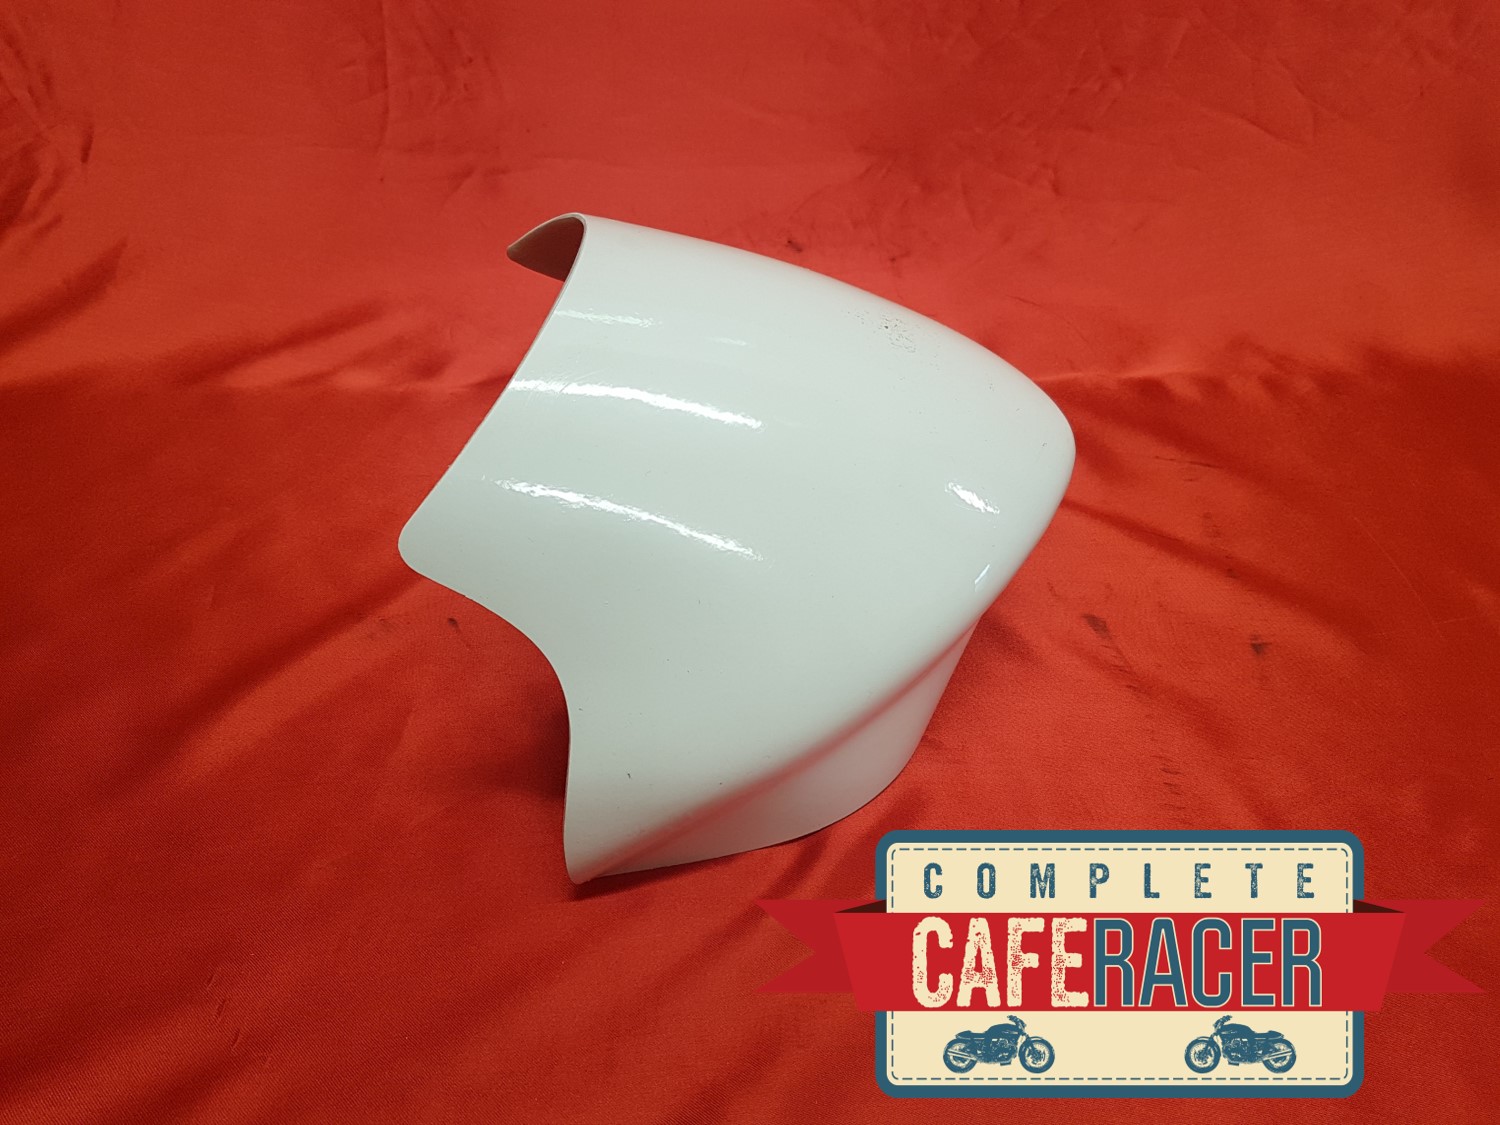 CAFE RACER UNIVERSAL SMALL FLY SCREEN - Complete Cafe Racer